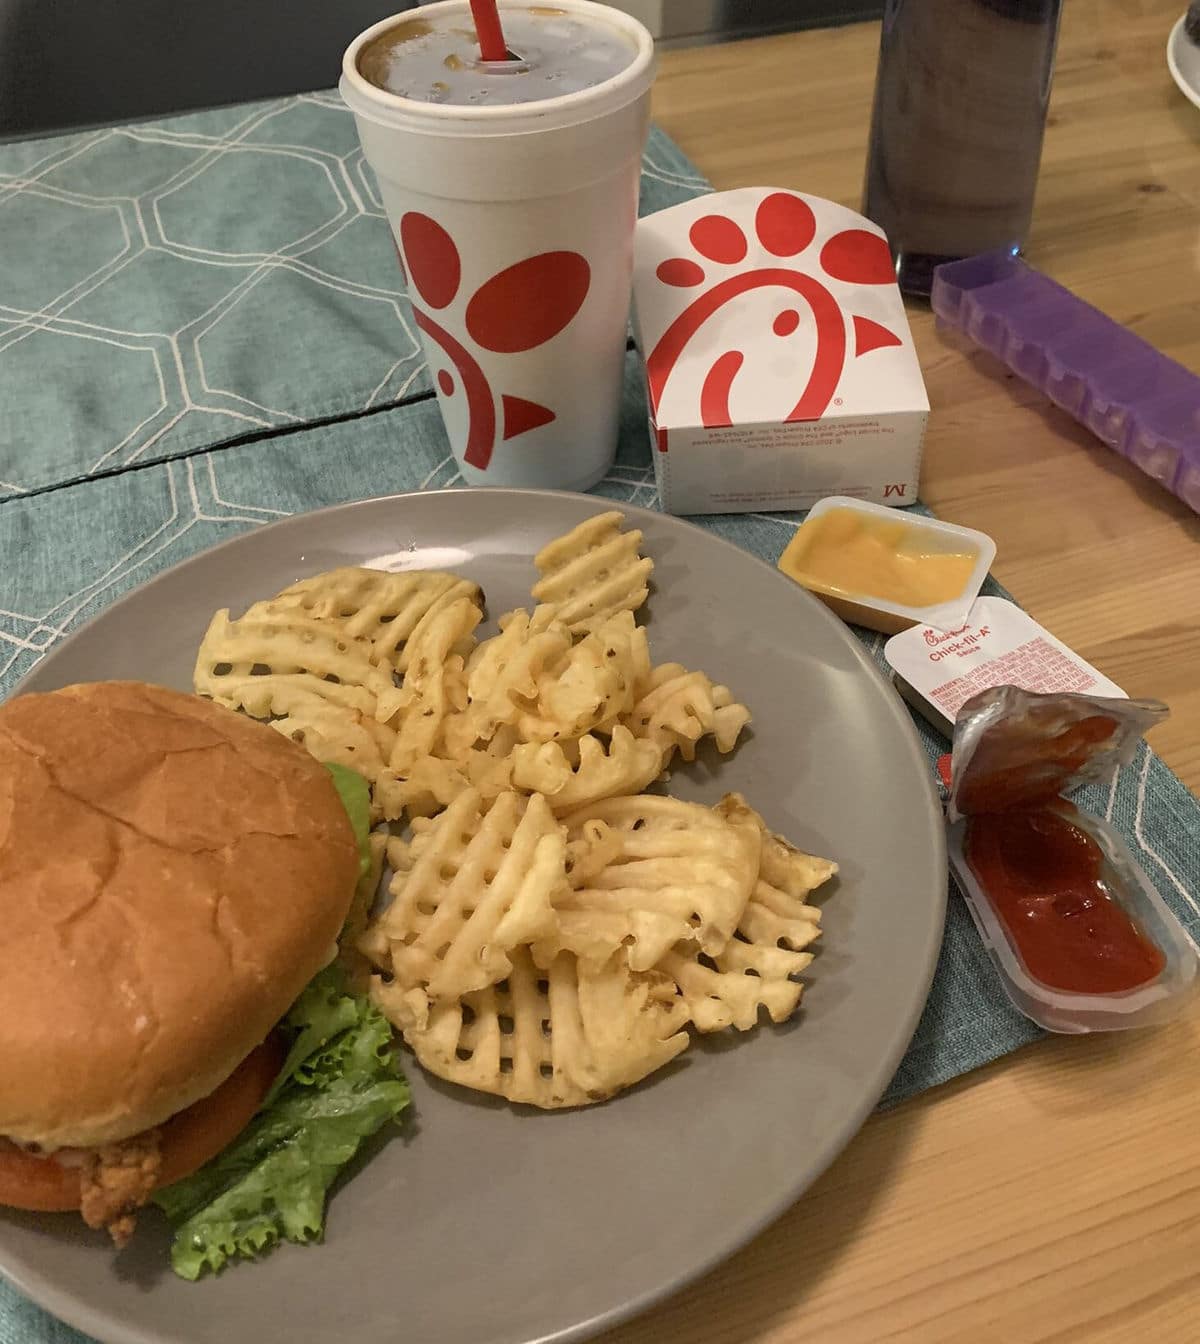 What is a Number 1 at Chick-Fil-A?